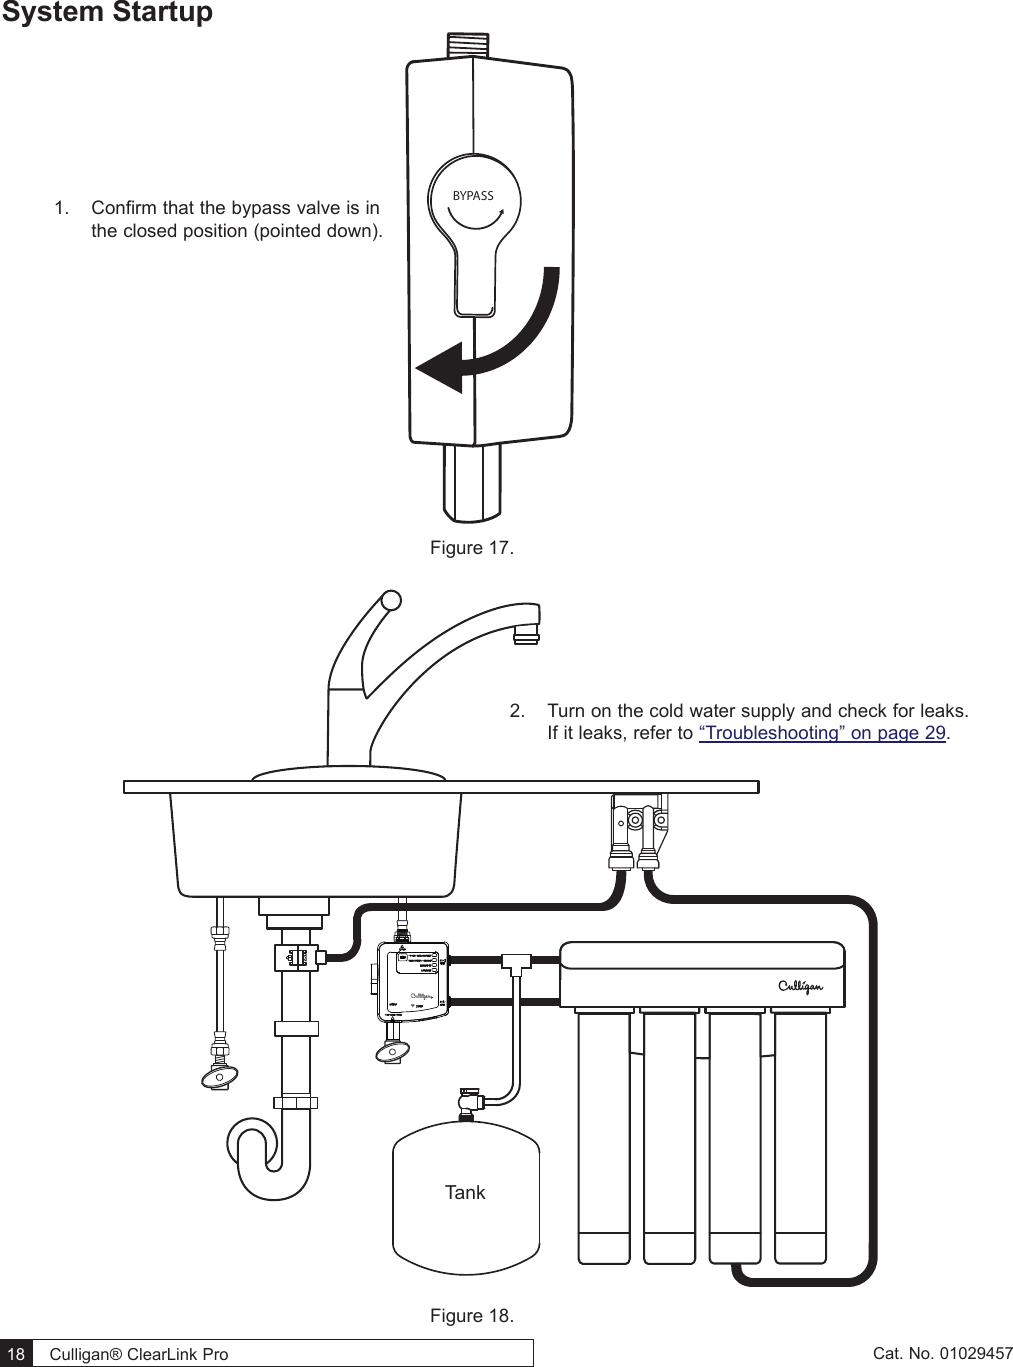  18   Culligan® ClearLink Pro  18  Cat. No. 01029457System Startup BYPASS Figure 17. TankFigure 18. 1.  Confirm that the bypass valve is in the closed position (pointed down).2.  Turn on the cold water supply and check for leaks. If it leaks, refer to “Troubleshooting” on page 29.